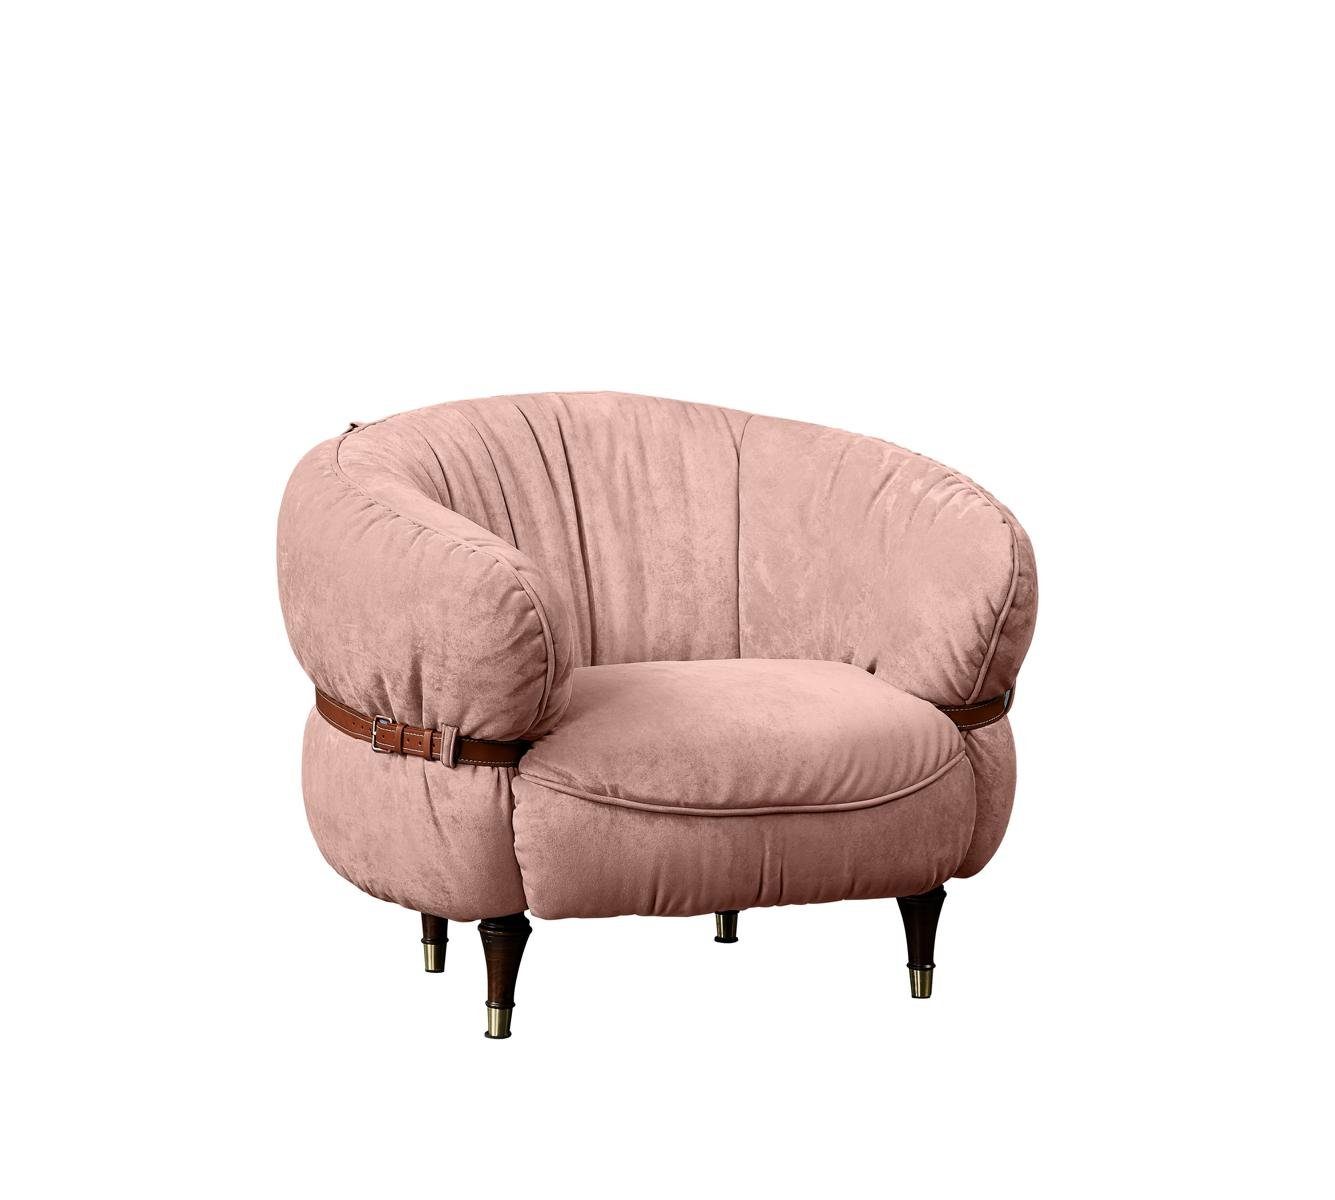 JVmoebel Sessel, Design Sessel Couch Sofa Relax Stoff Lounge Luxus Fernseh Club Polster Rosa